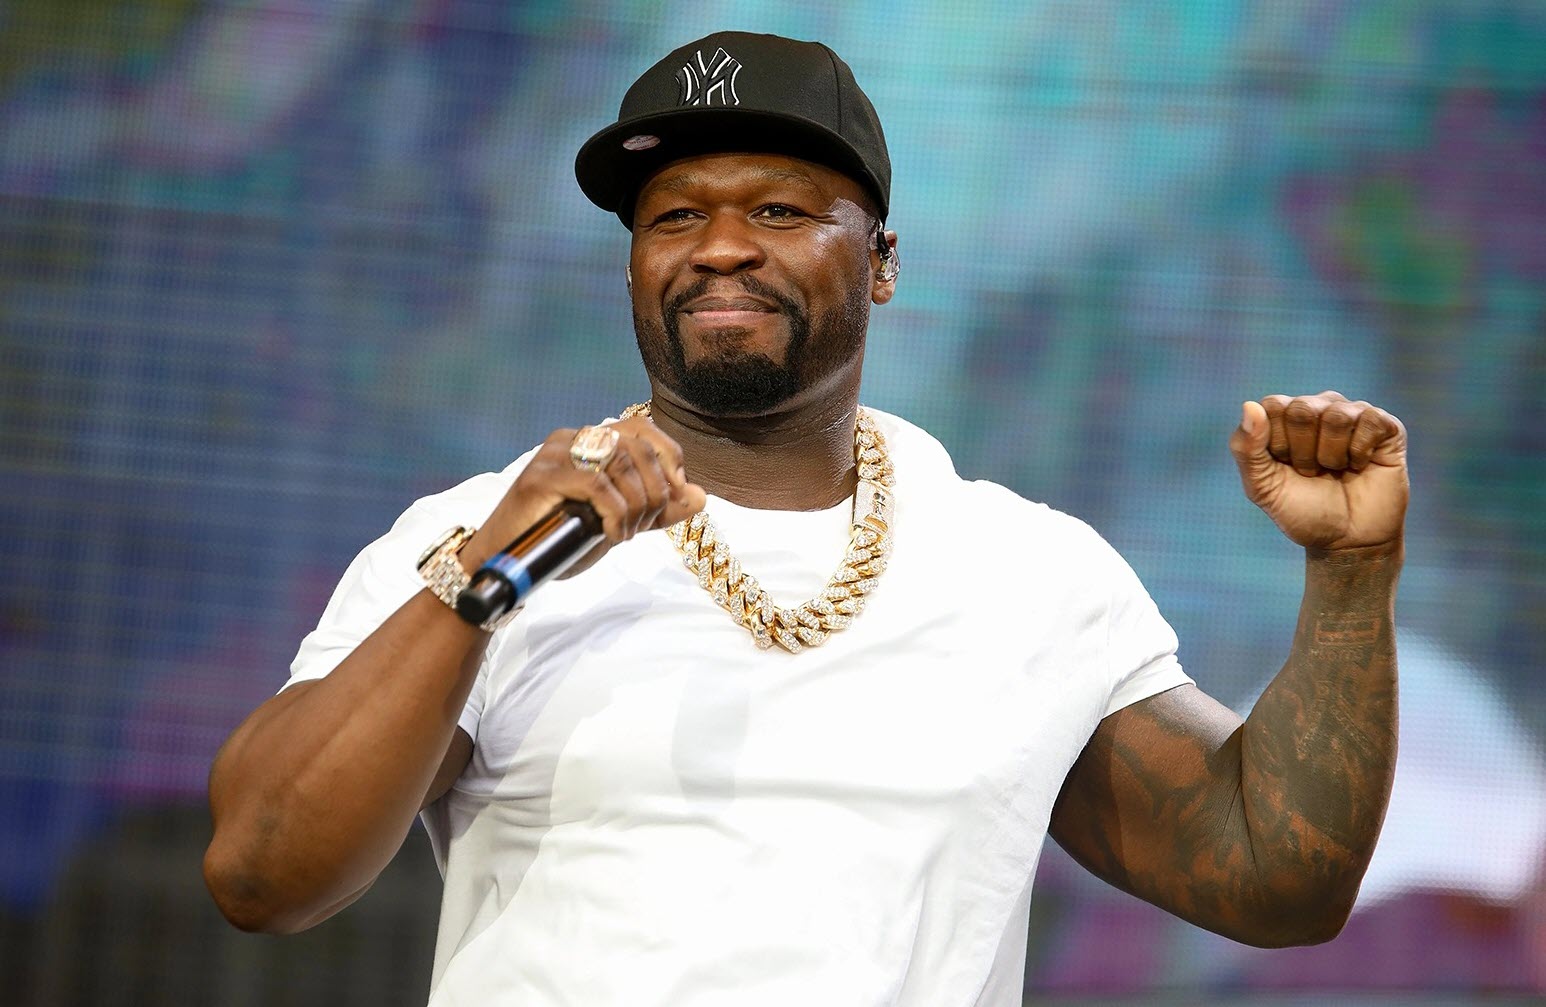 10 Best 50 Cent Songs Of All Time - Singersroom.com